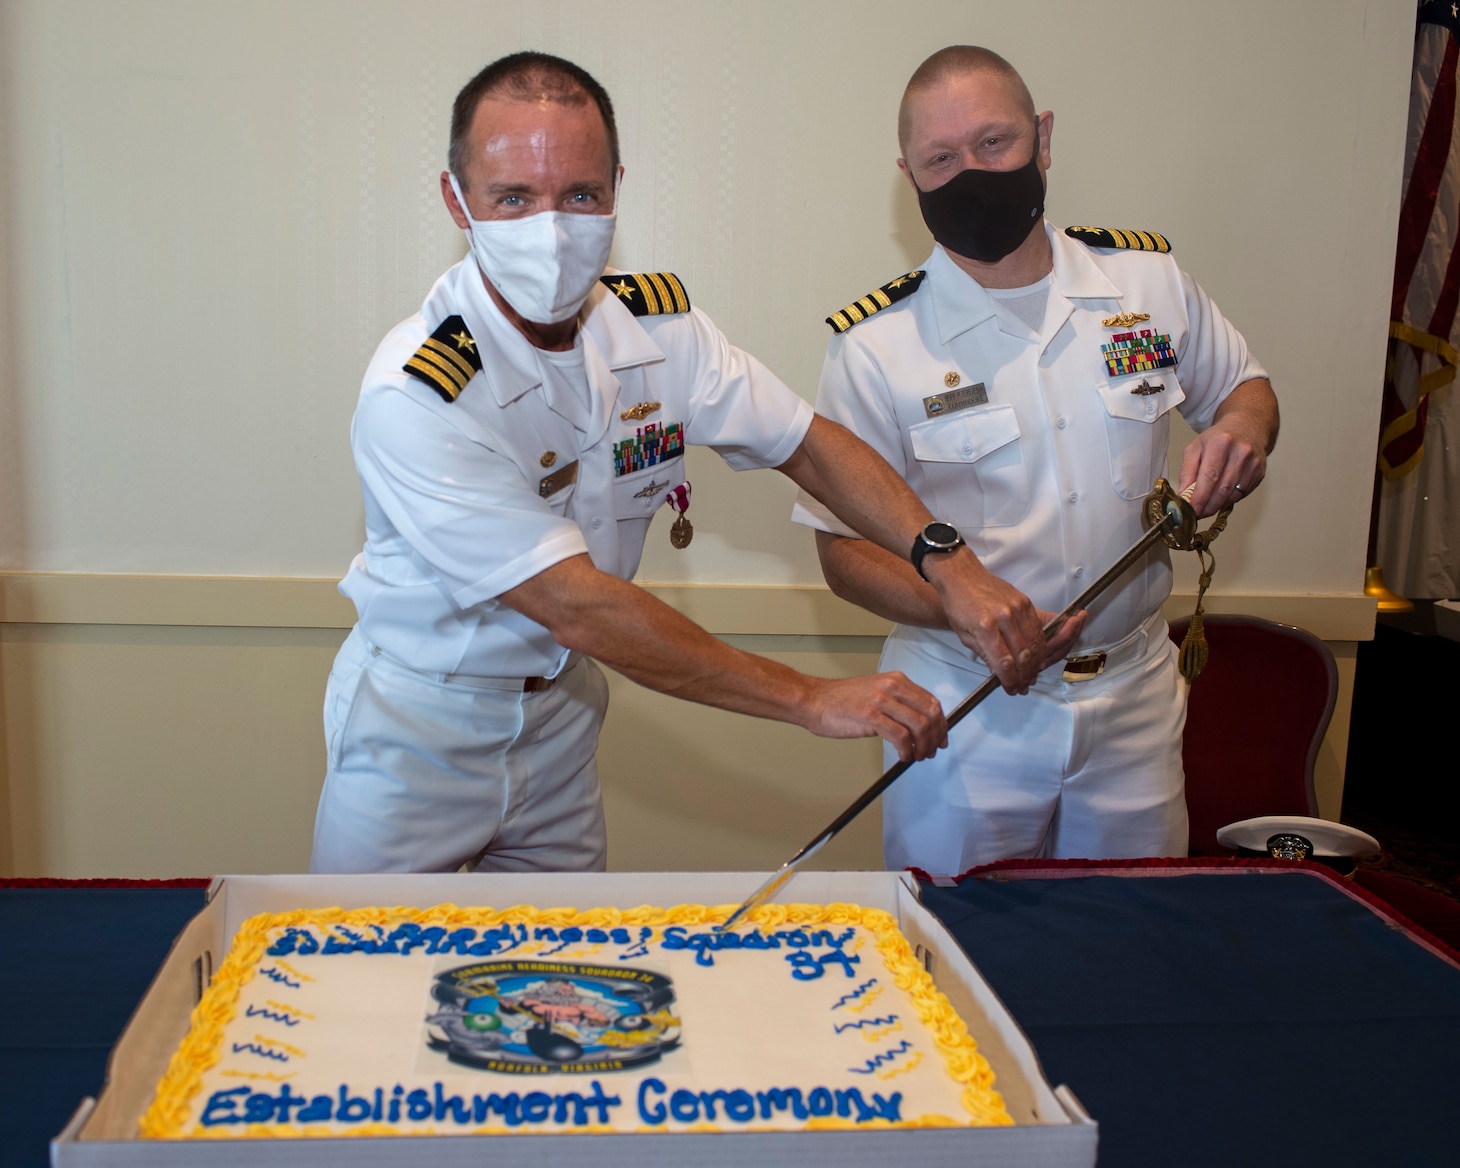 Cmdr. Bryan Christiansen, left, and Capt. Jeffrey Juergens, commander, Submarine Squadron 6, participate in a cake-cutting ceremony in recognition of the establishment of Submarine Readiness Squadron (SRS) 34 at Naval Station Norfolk, Sept. 30.